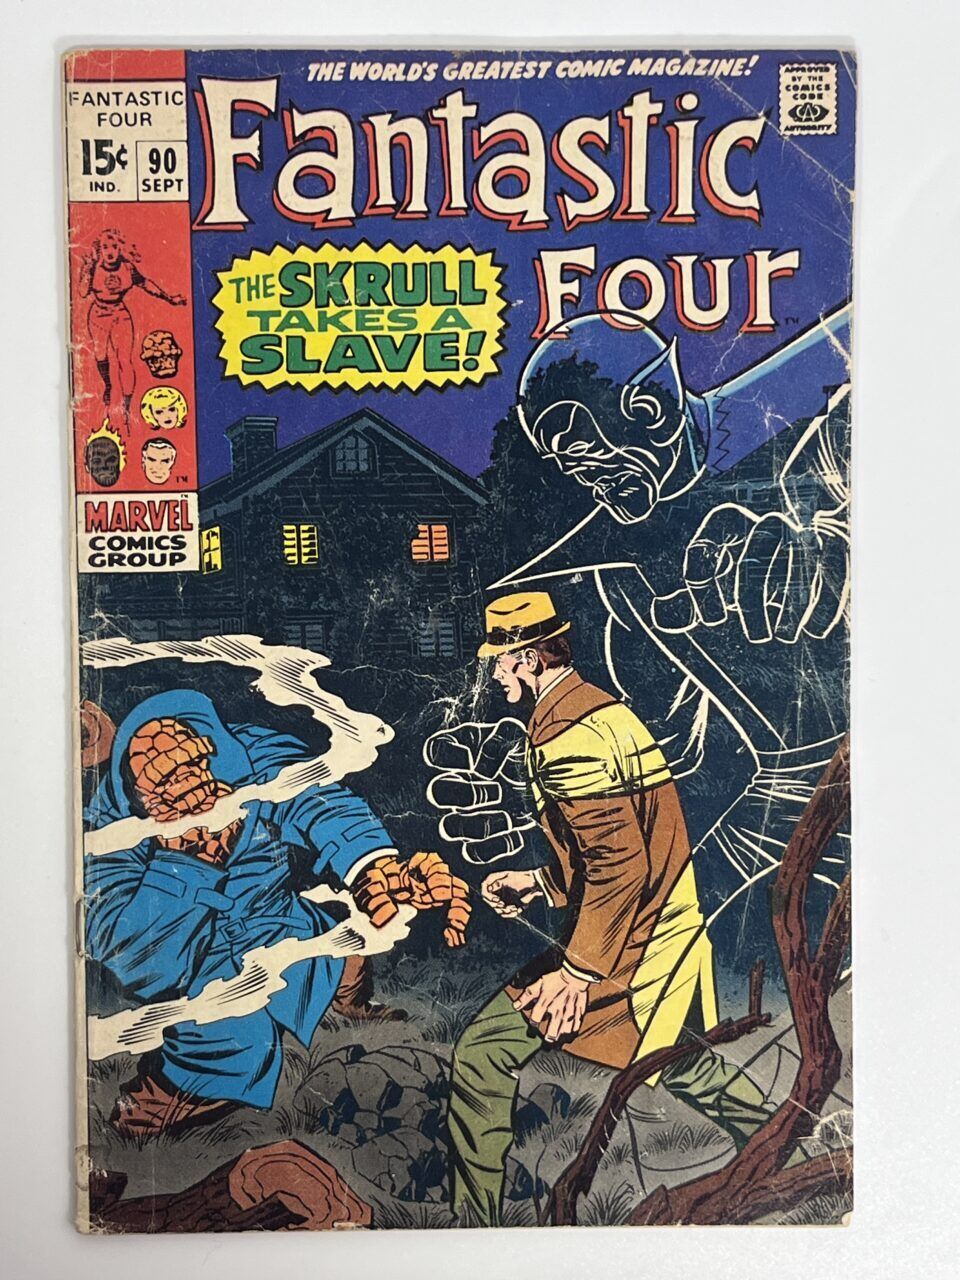 Fantastic Four #90 (1969) in 3.5 Very Good-